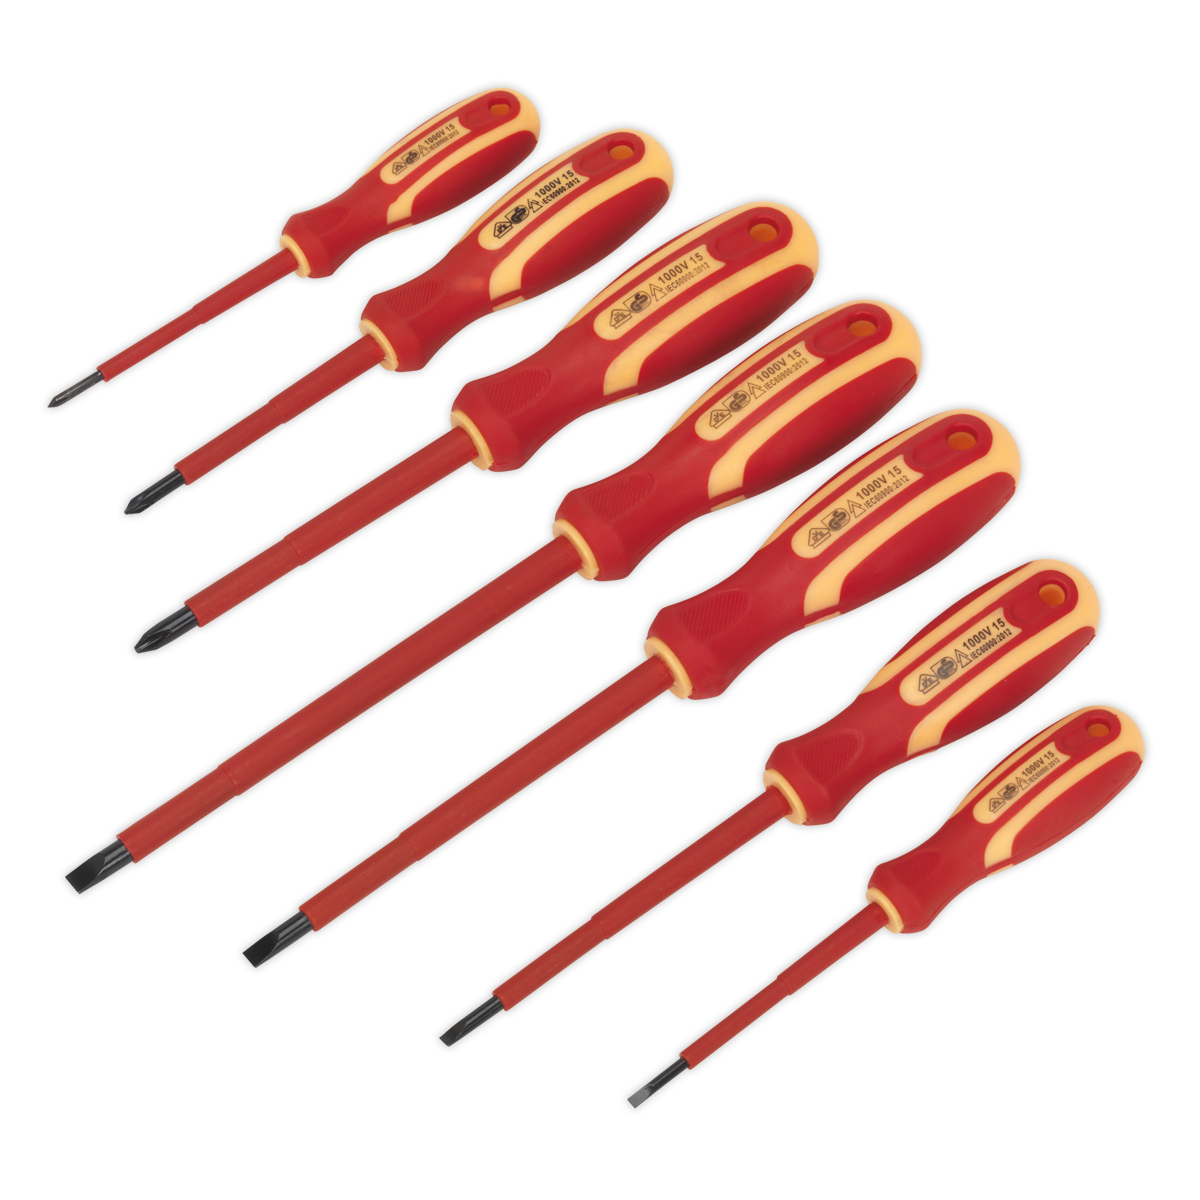 Sealey Screwdriver Set 7pc Electrician's VDE Approved S0756 | Set compromises four slotted and three Phillips screwdrivers. | toolforce.ie